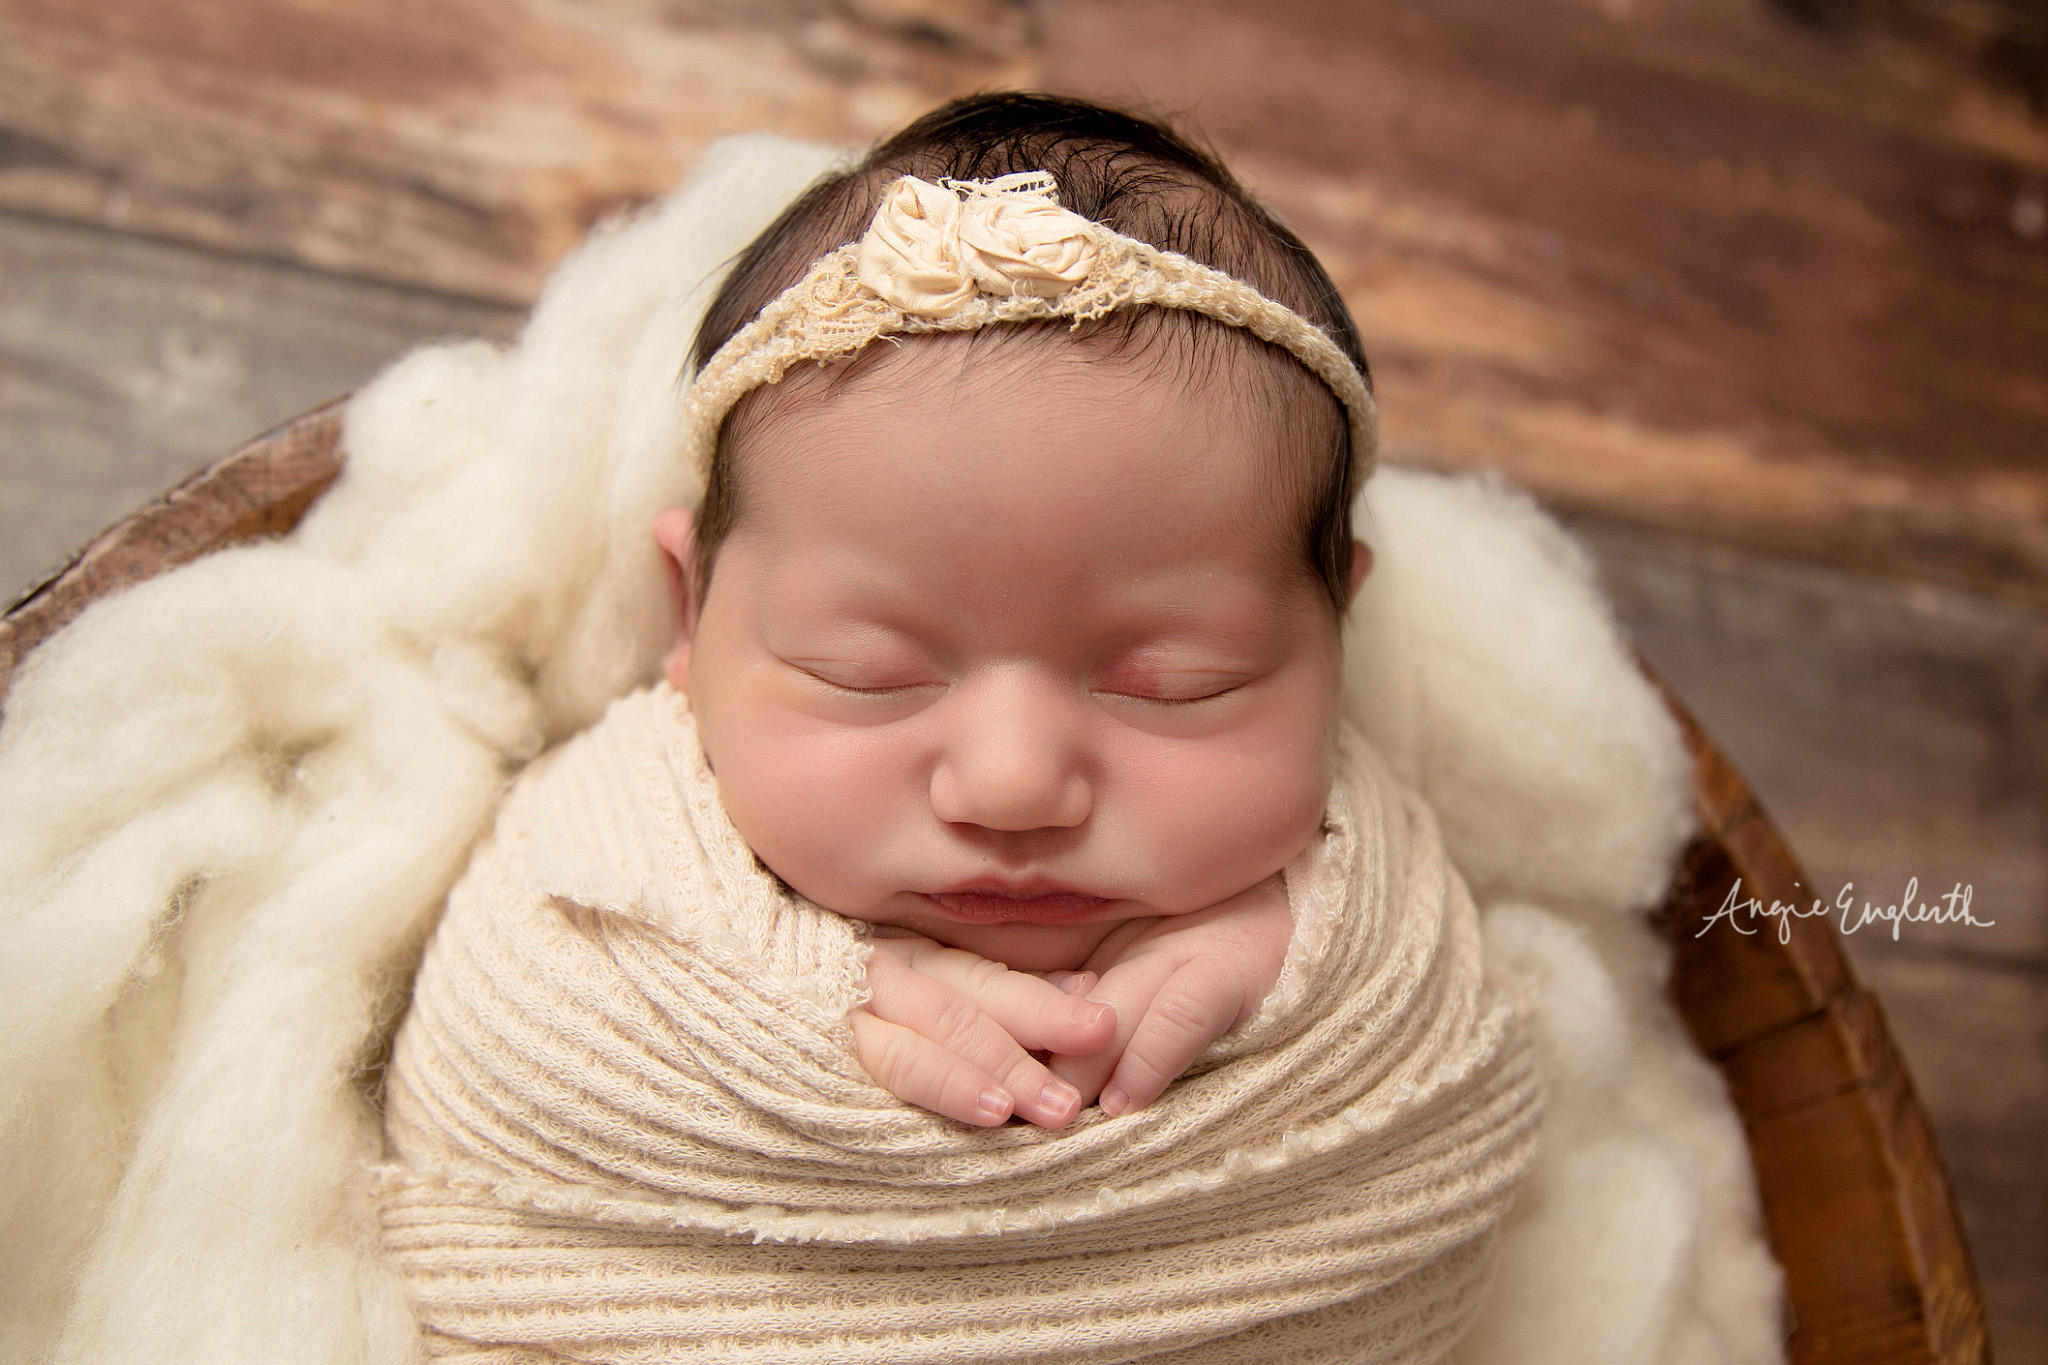 lancaster_newborn_and_maternity_photographer_angie_englerth_central_pa_b042.jpg